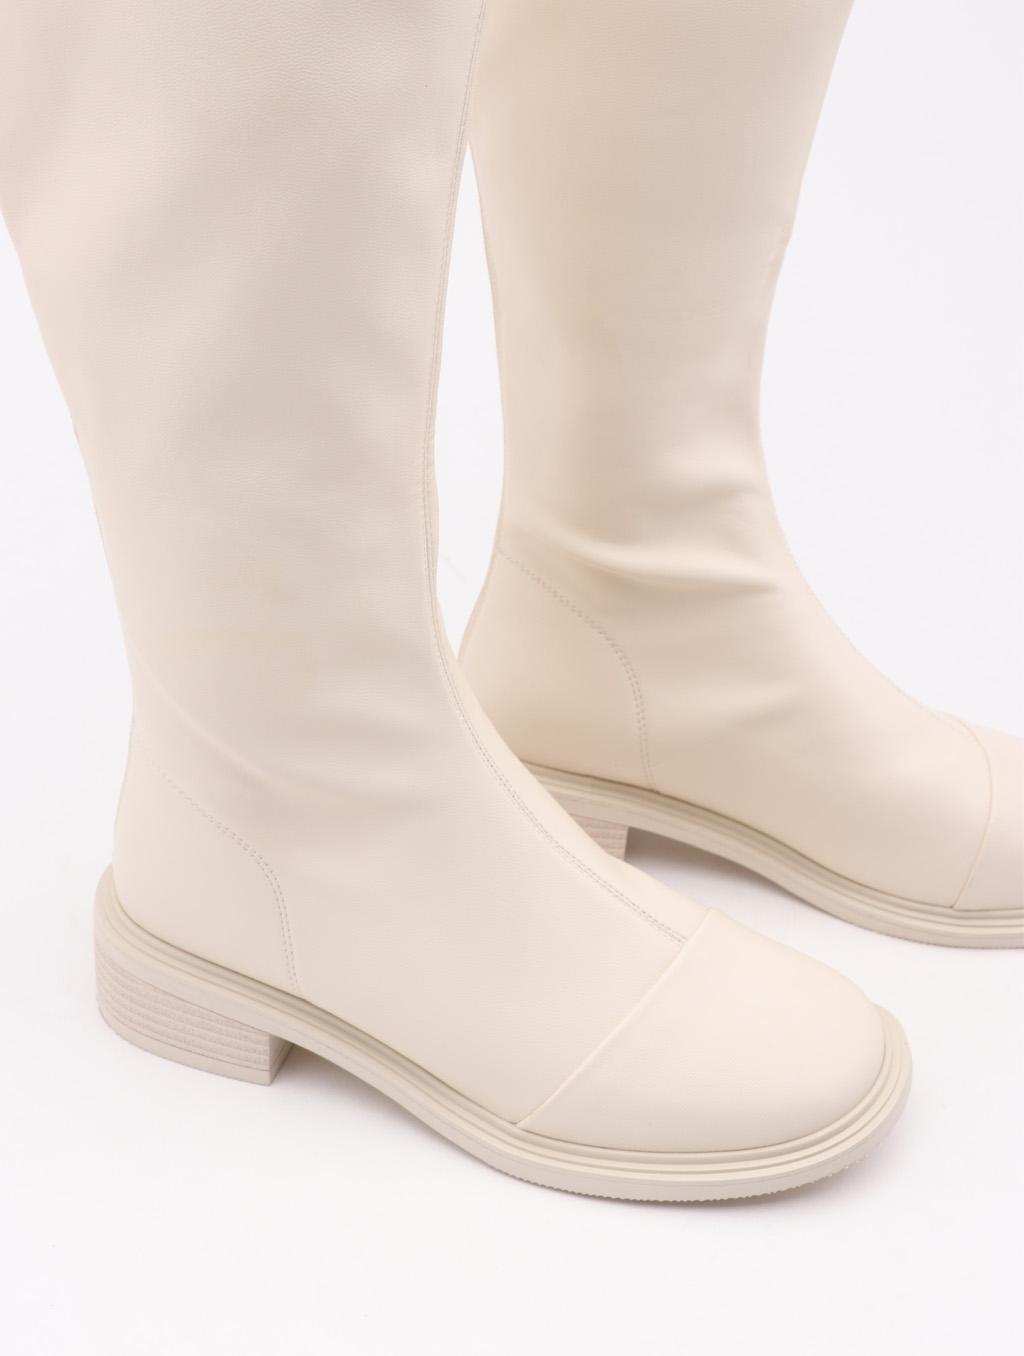 Lattelier Classic Knee-high Boots in White | Lyst